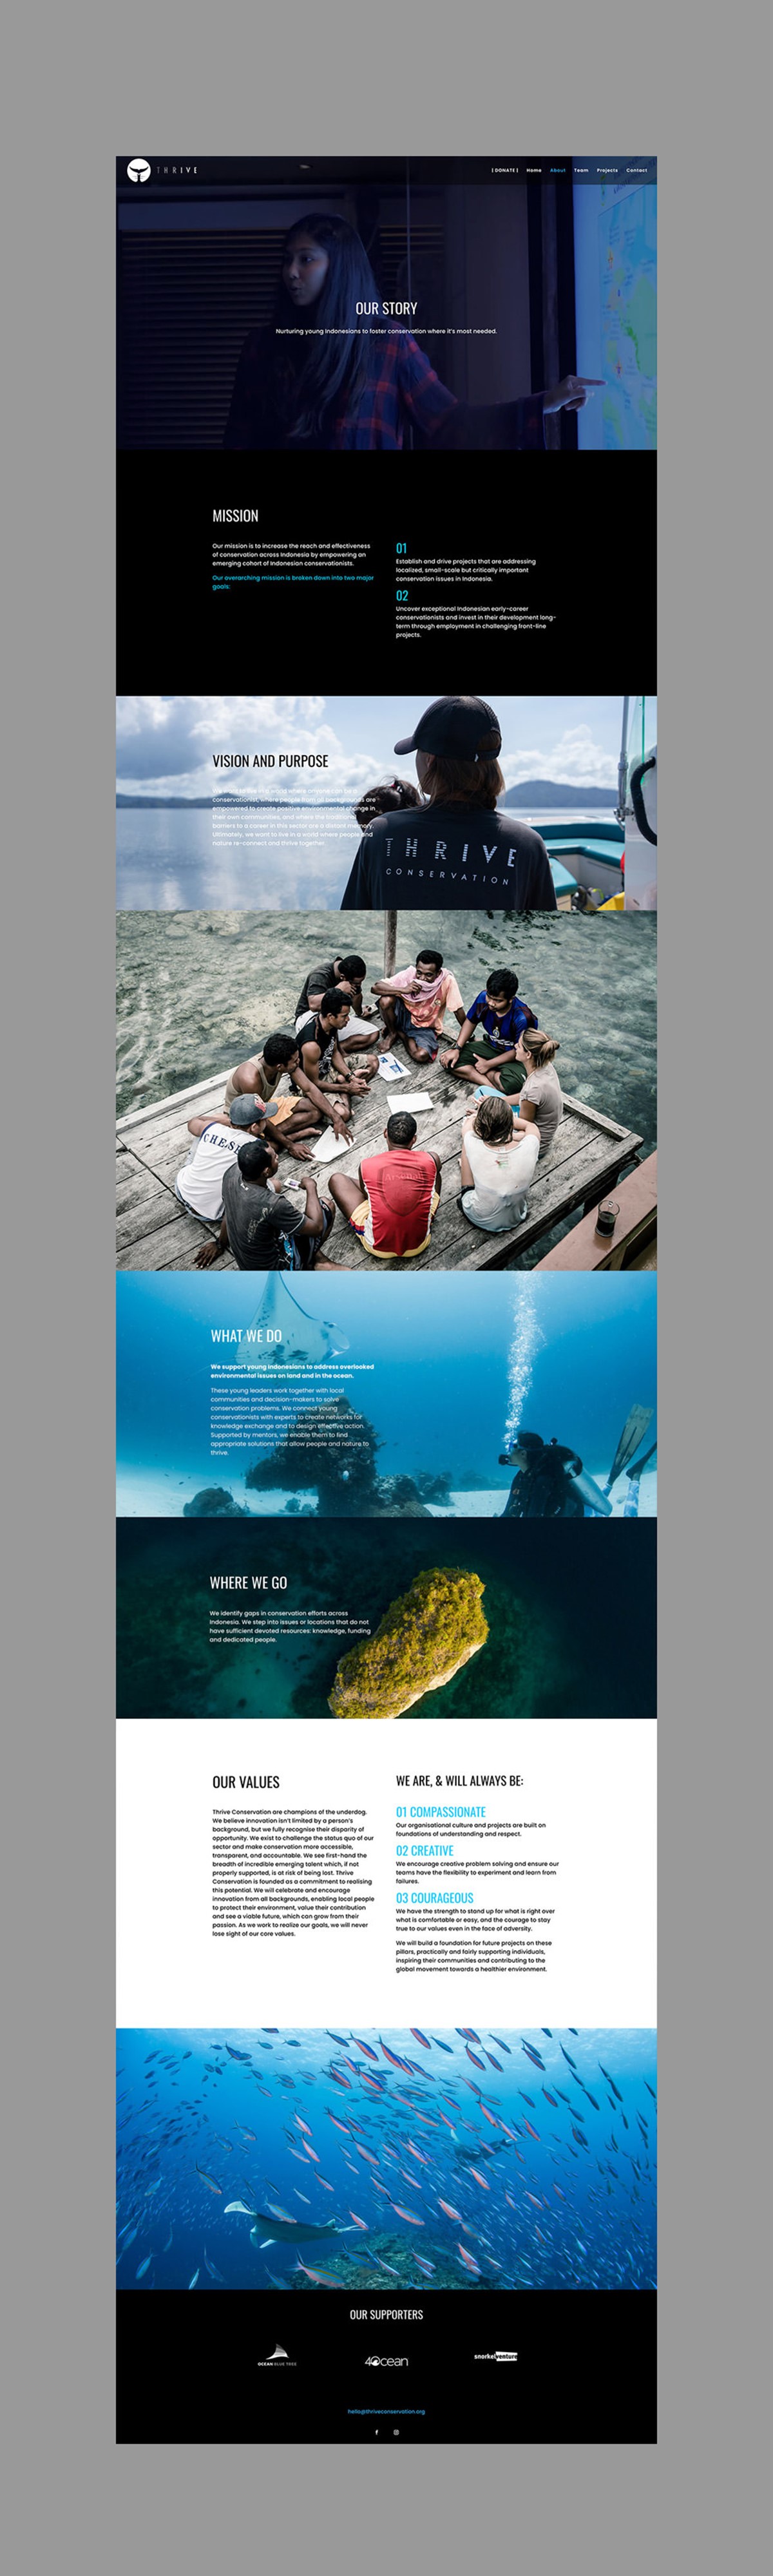 Thrive Conservation. Website. About page. Website design by Superfried.